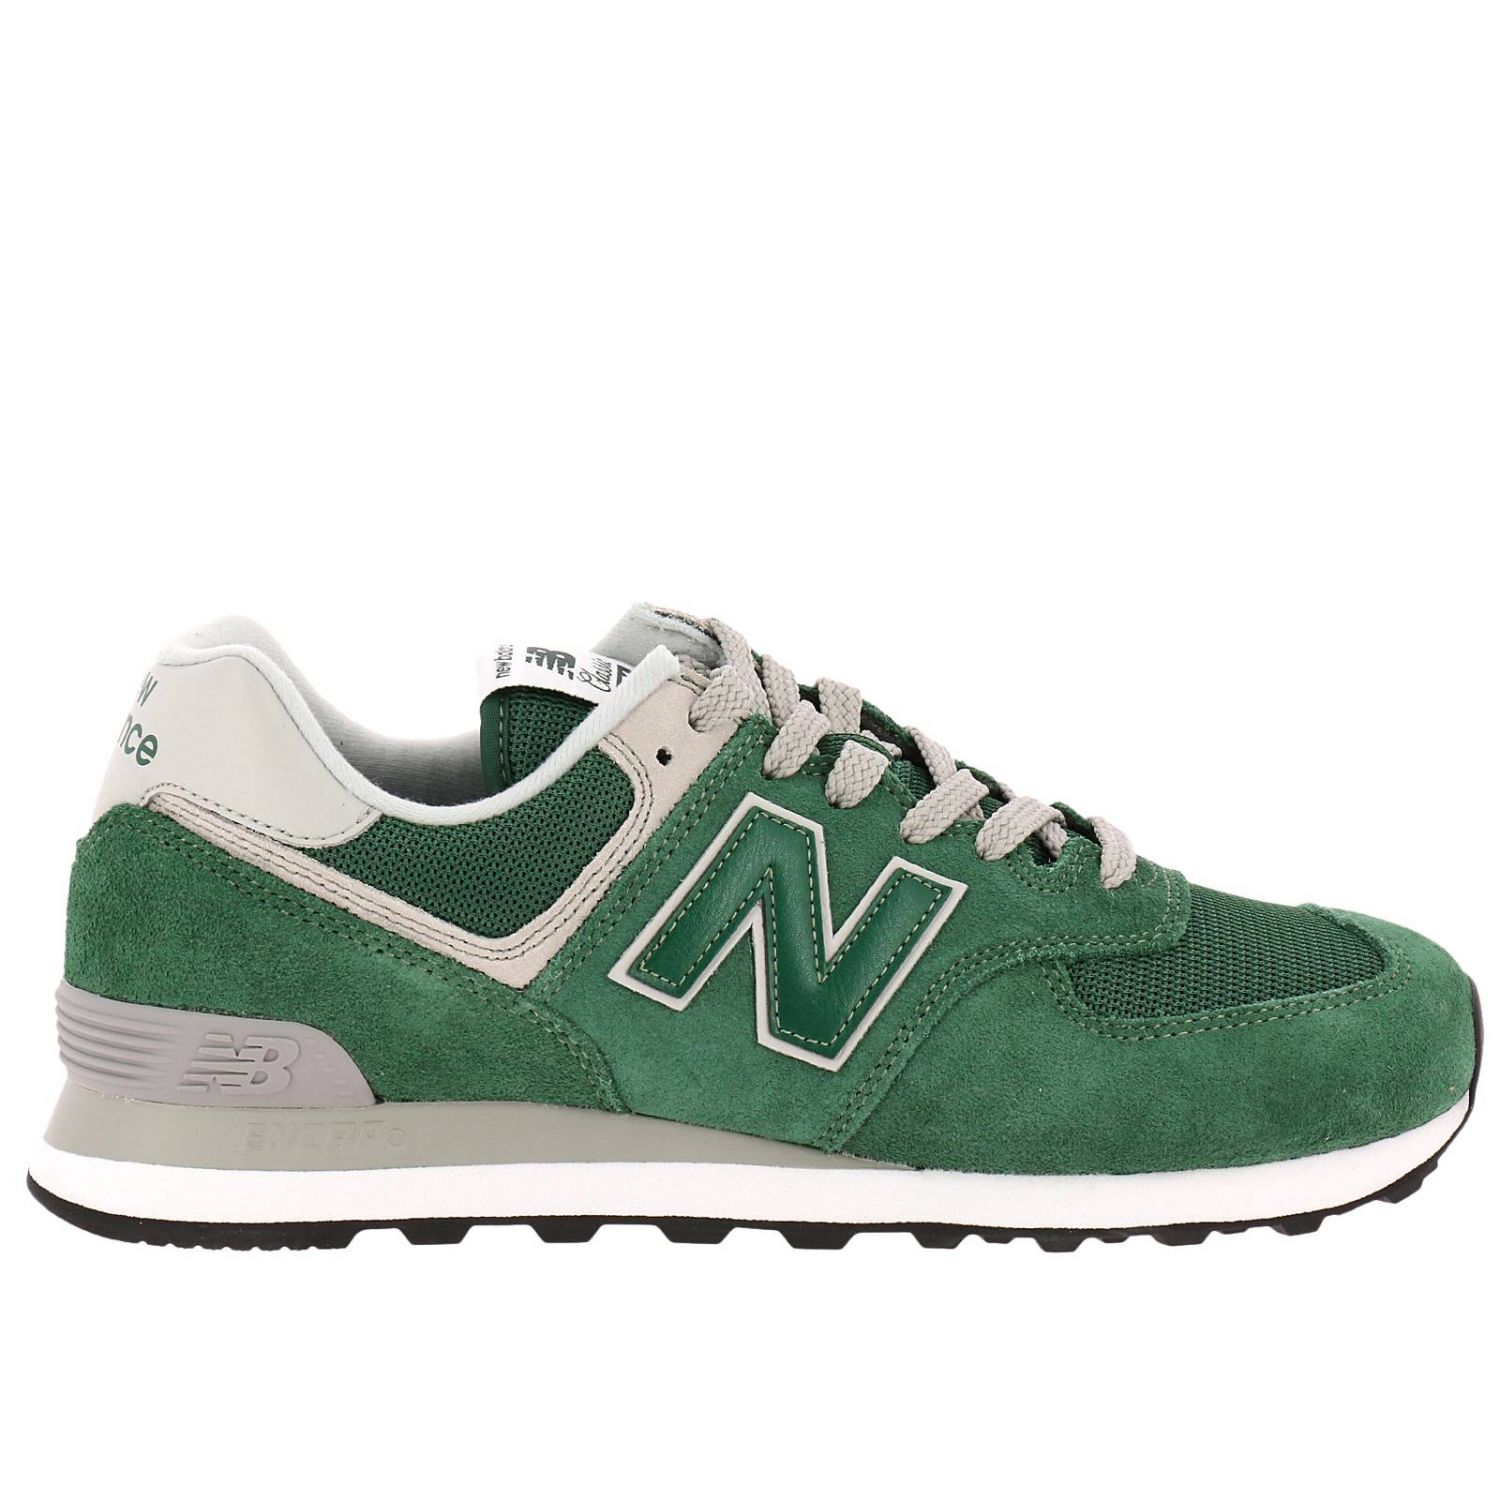 NEW BALANCE Outlet: Sneakers men - Green | NEW BALANCE sneakers ...